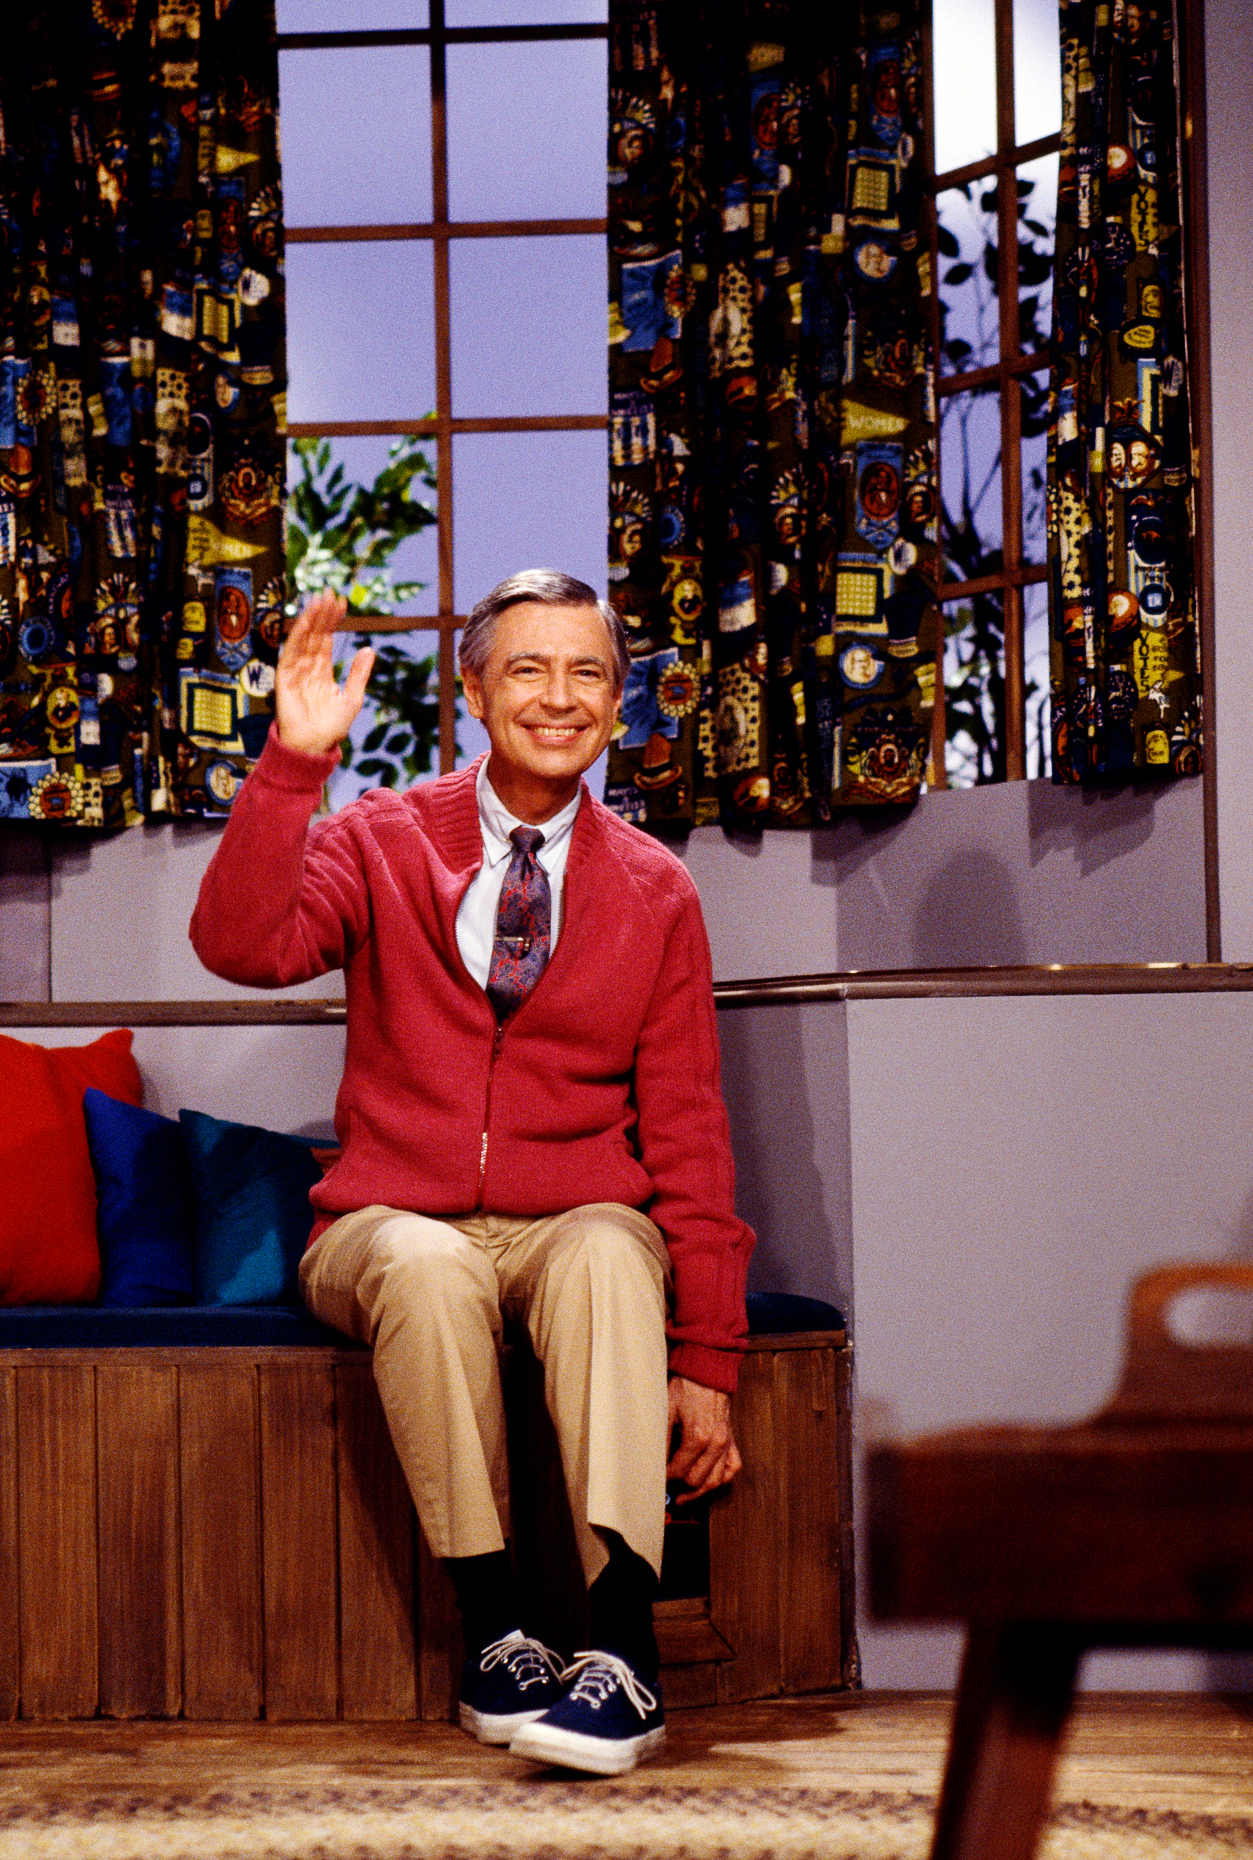 FRED ROGERS OF PUBLIC TV